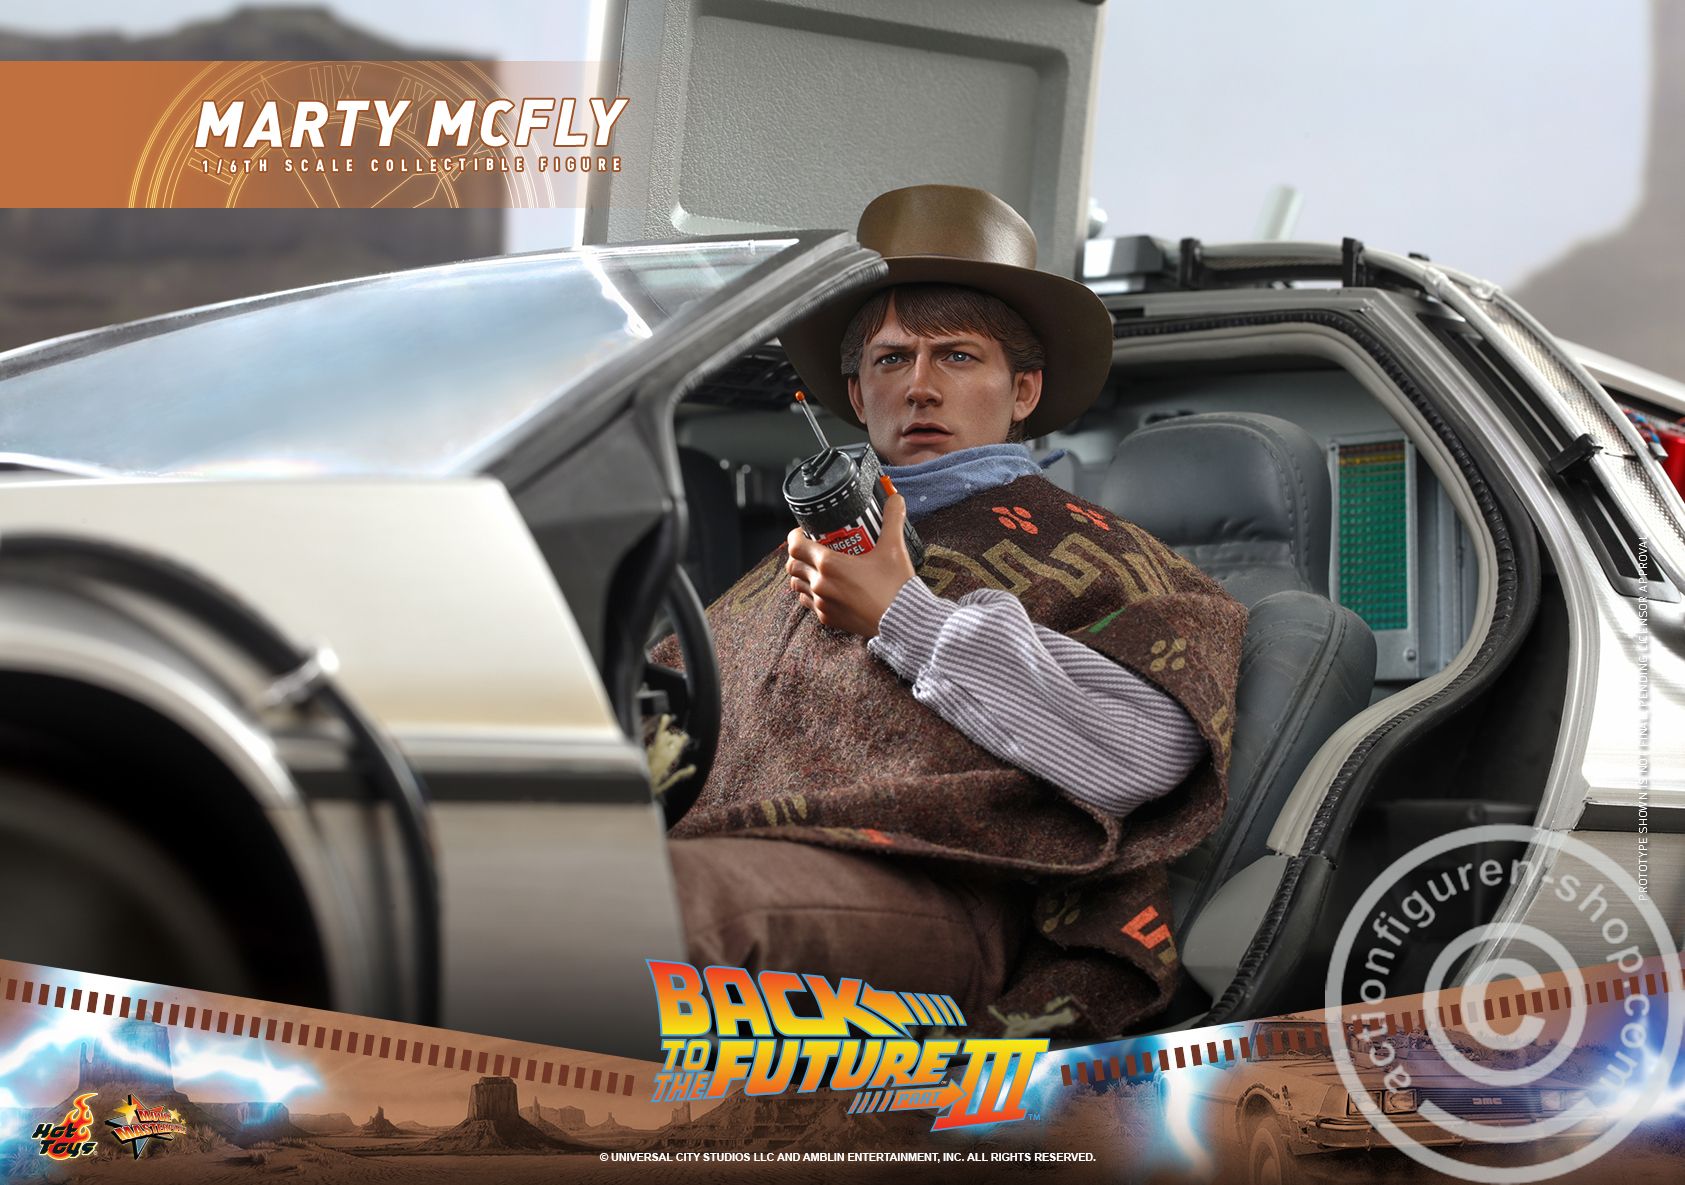 Back To The Future Part III - Marty McFly